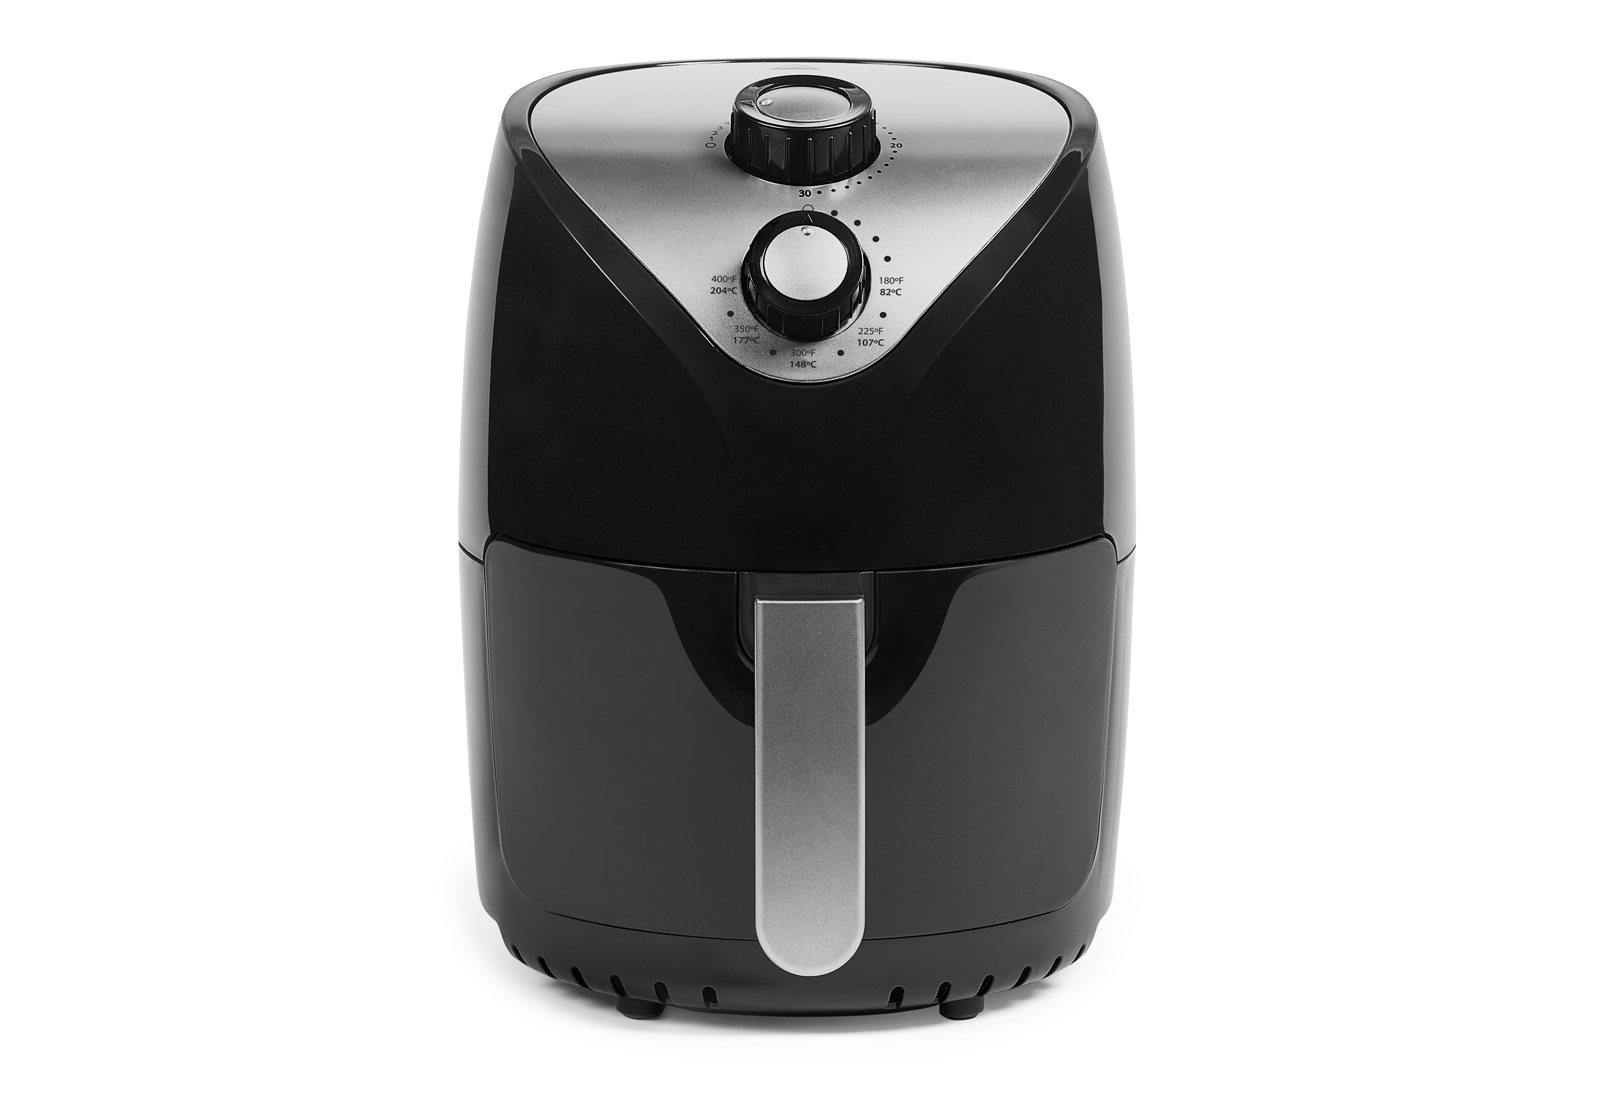 Power AirFryer 2QT Product Image